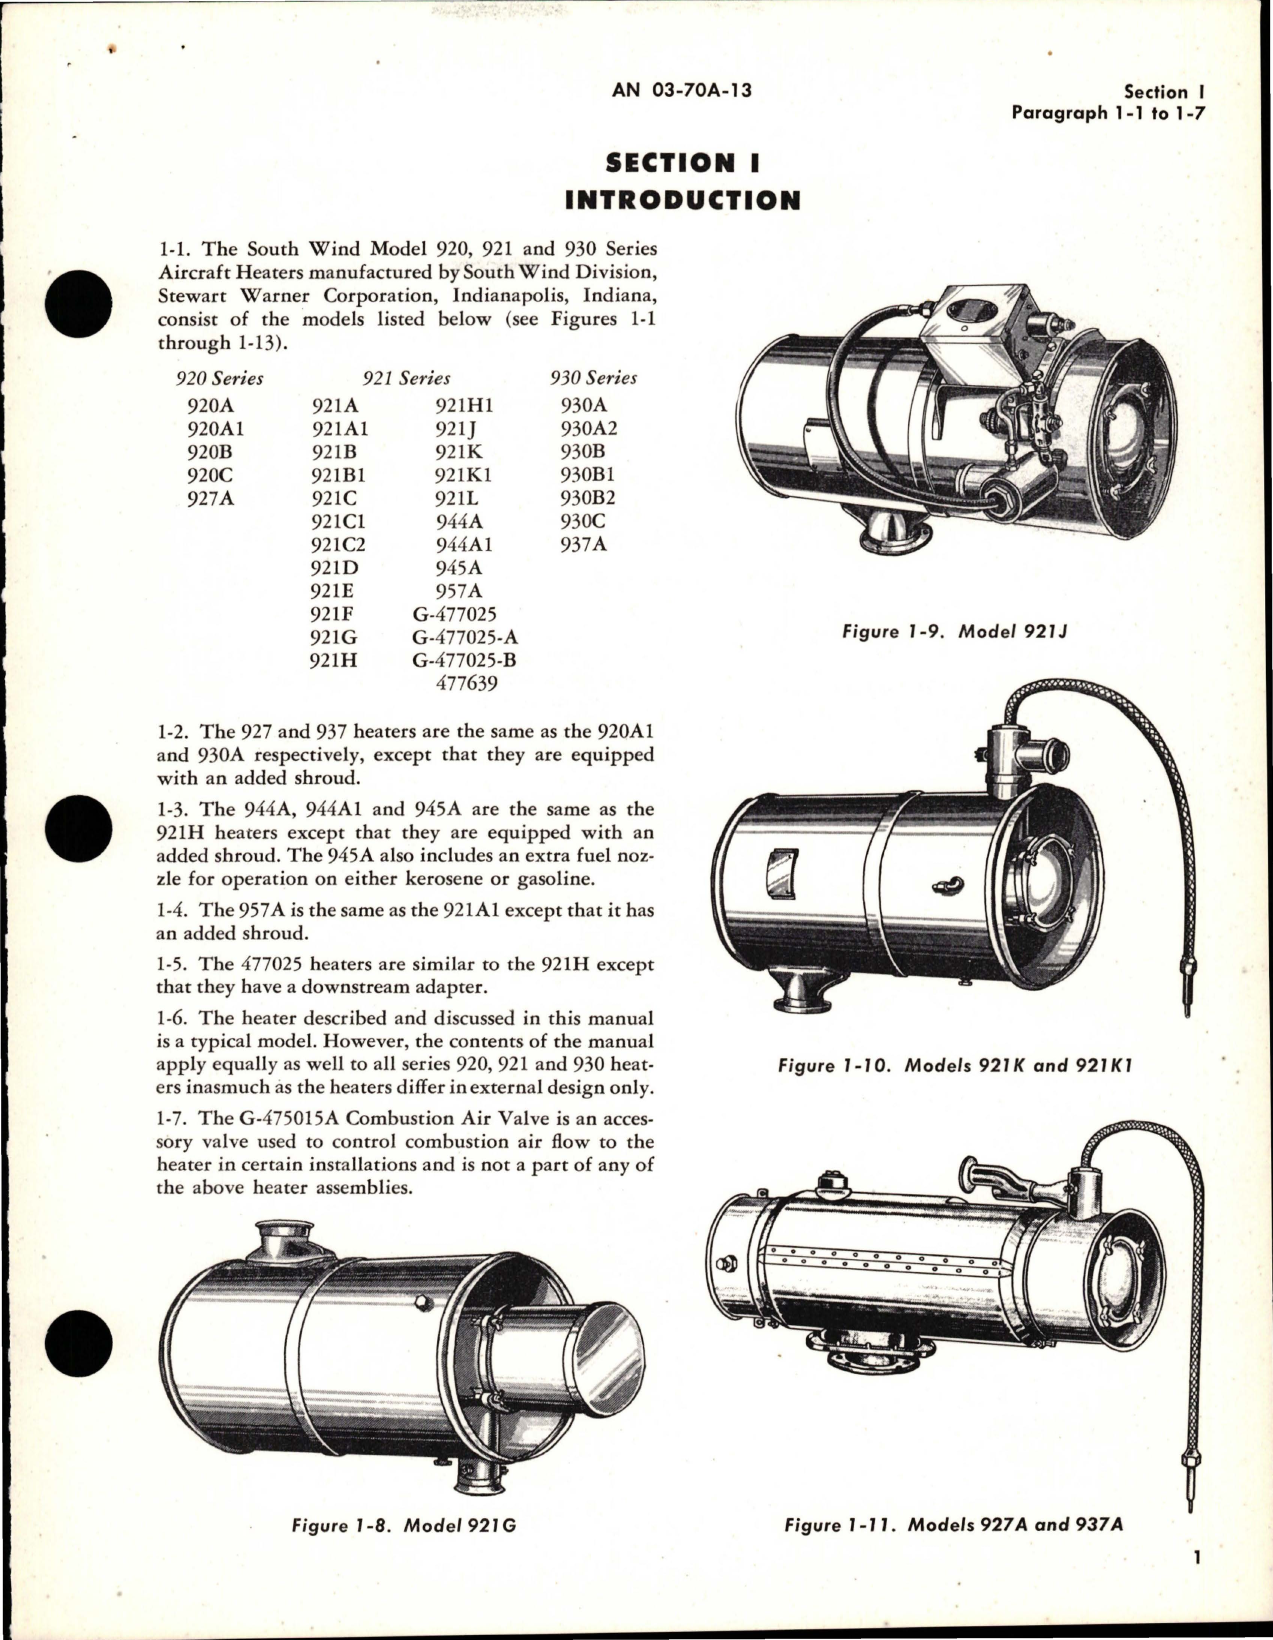 Sample page 5 from AirCorps Library document: Overhaul Instructions for Aircraft Heaters - Model 920, 921 and 930 Series